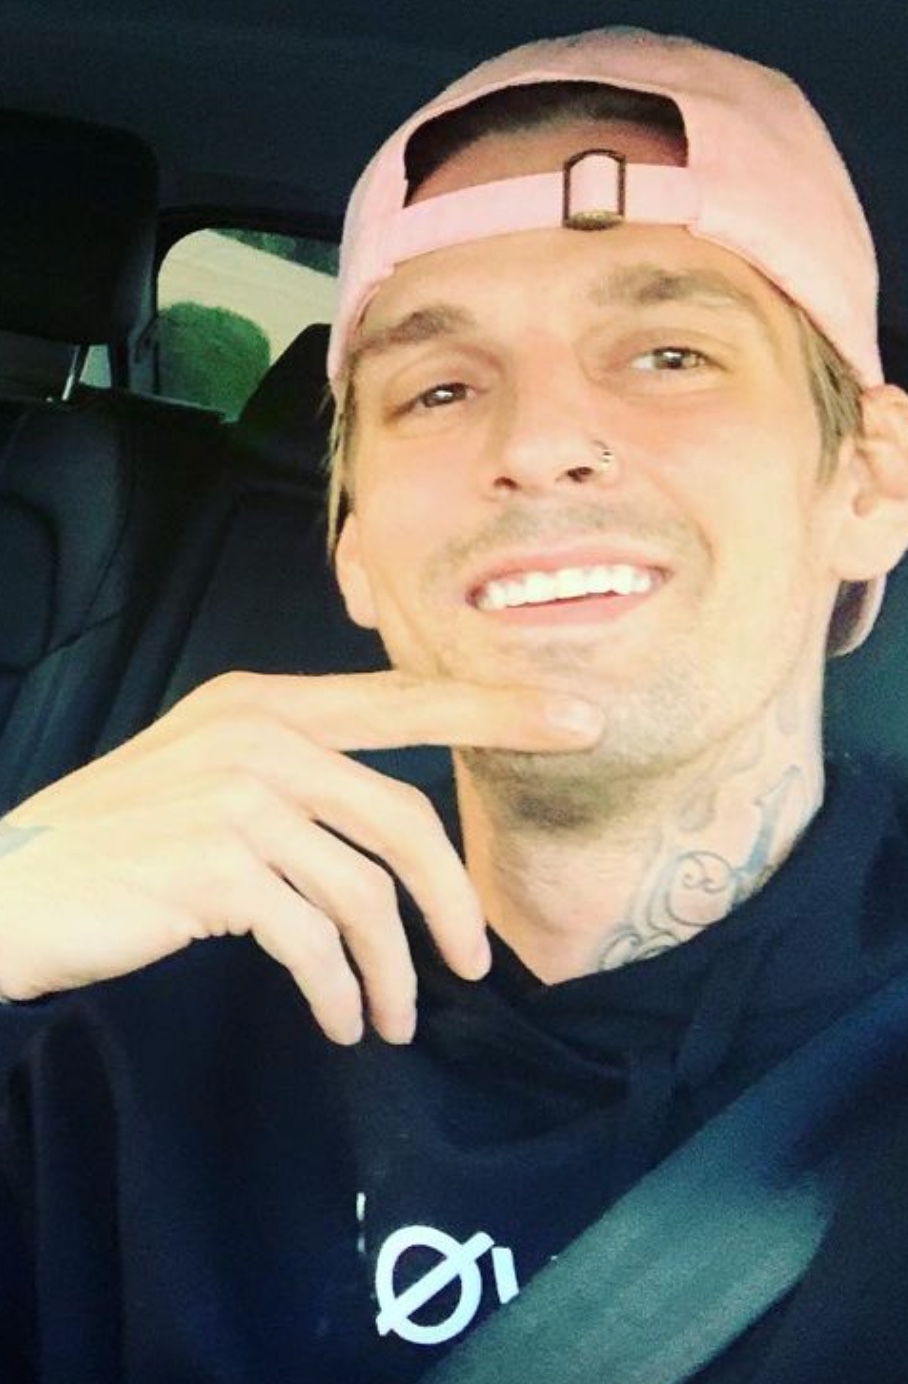 Aaron Carter's 2-Year-Old Son Files Wrongful Death Lawsuit | Aaron Carter’s son, 2-year-old Princeton Lyric Carter, is named as the plaintiff in a wrongful death lawsuit.